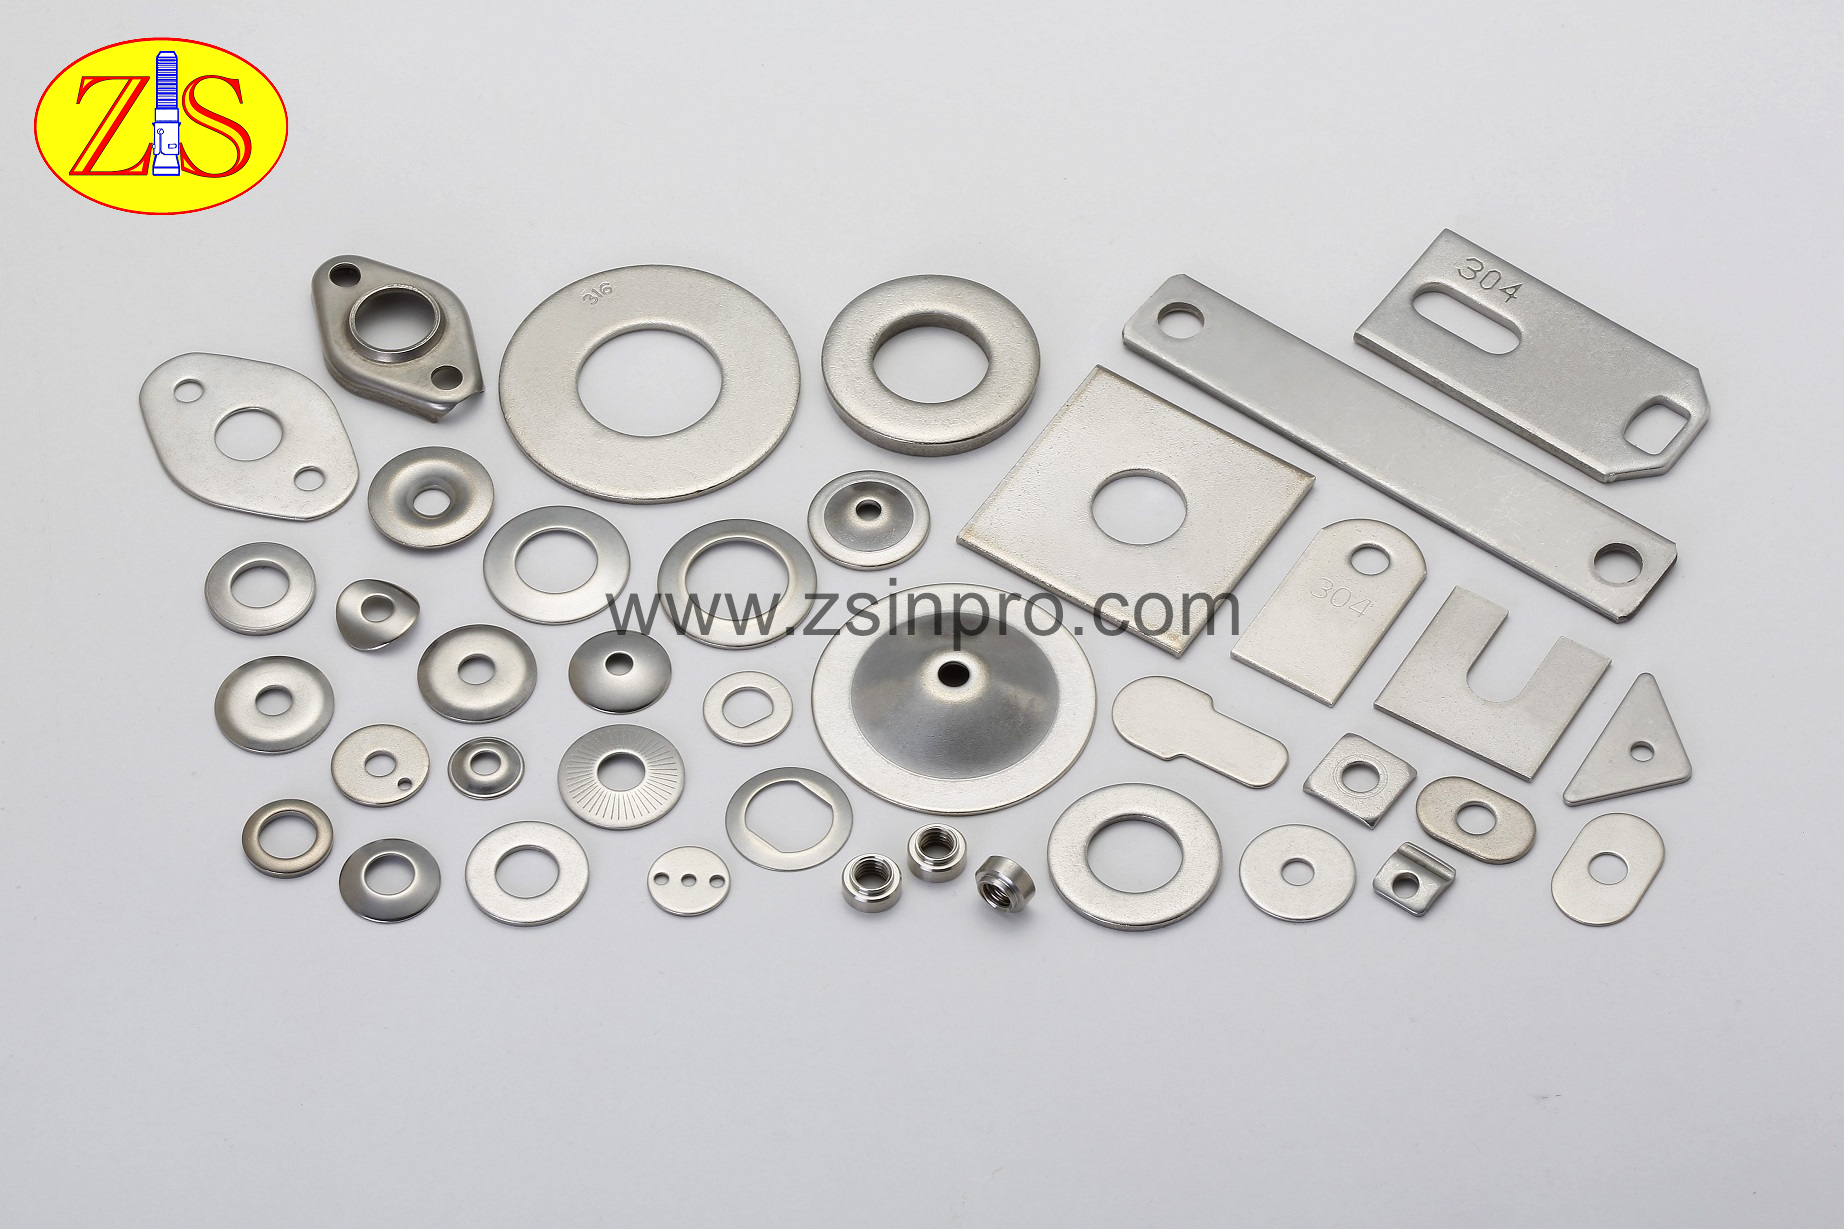 Stainless Steel Washers, Washers for Screws, SS Washer Made by Stamping for Fluid Control, Valves, and Flood Prevention